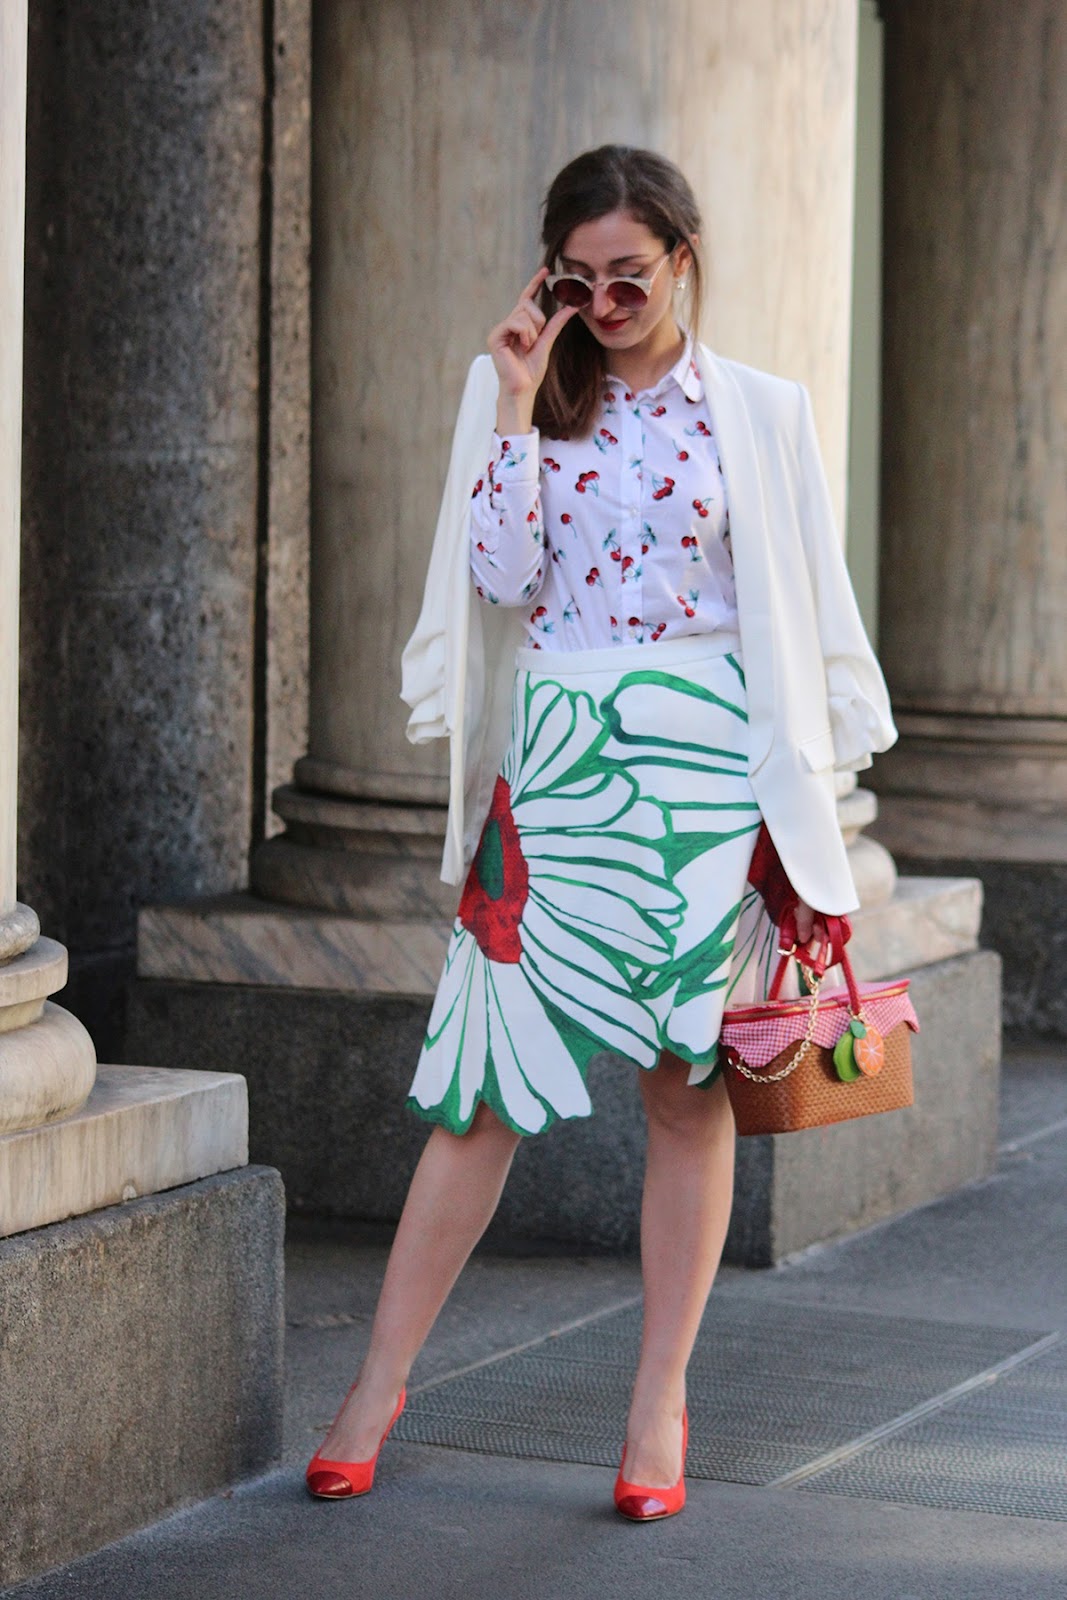 fashion style blogger outfit ootd italian girl italy trend vogue glamour milano fashion week mfw flower skirt accessorize pic nic bag zara blazer red heels hm